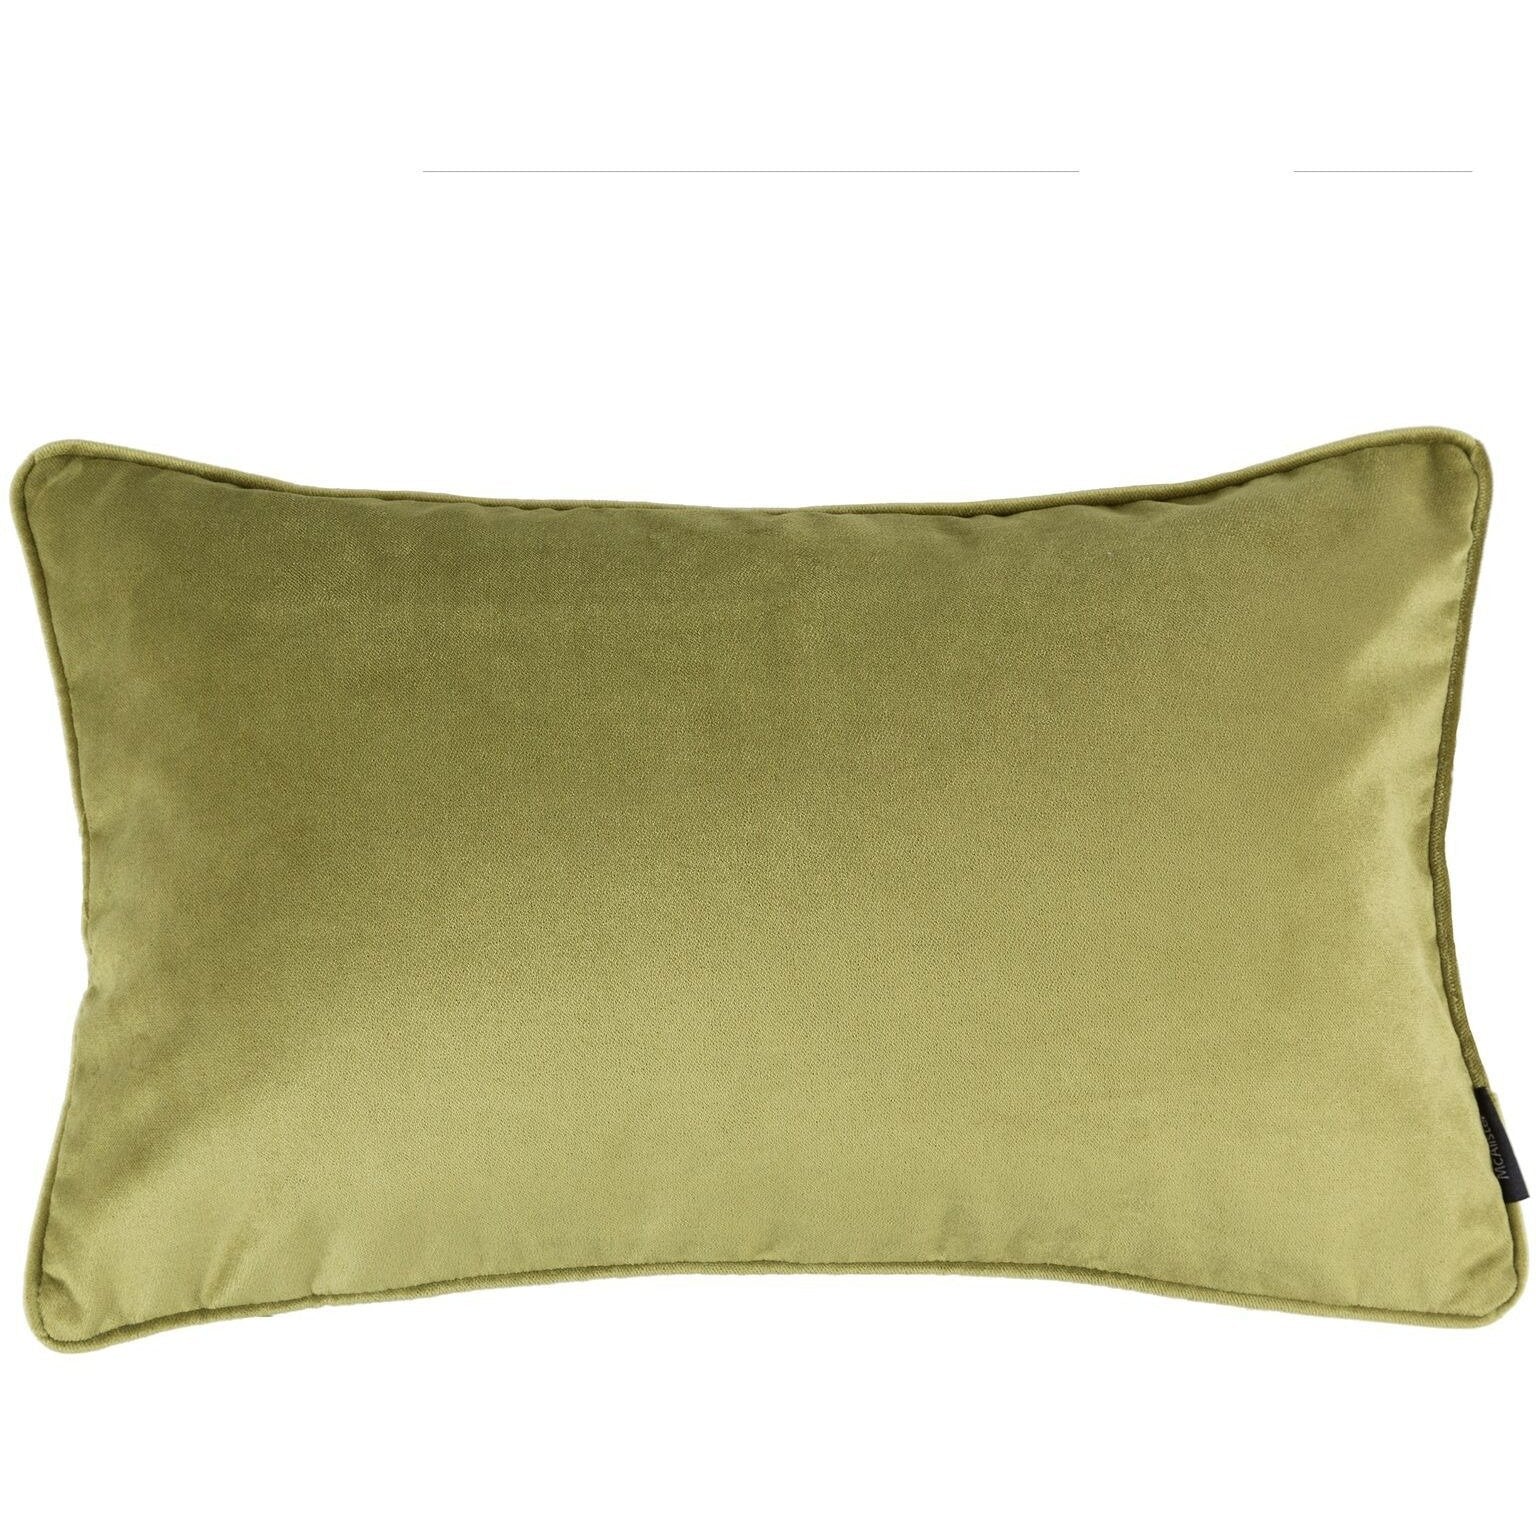 McAlister Textiles Matt Lime Green Velvet Cushion Cushions and Covers Cover Only 50cm x 30cm 